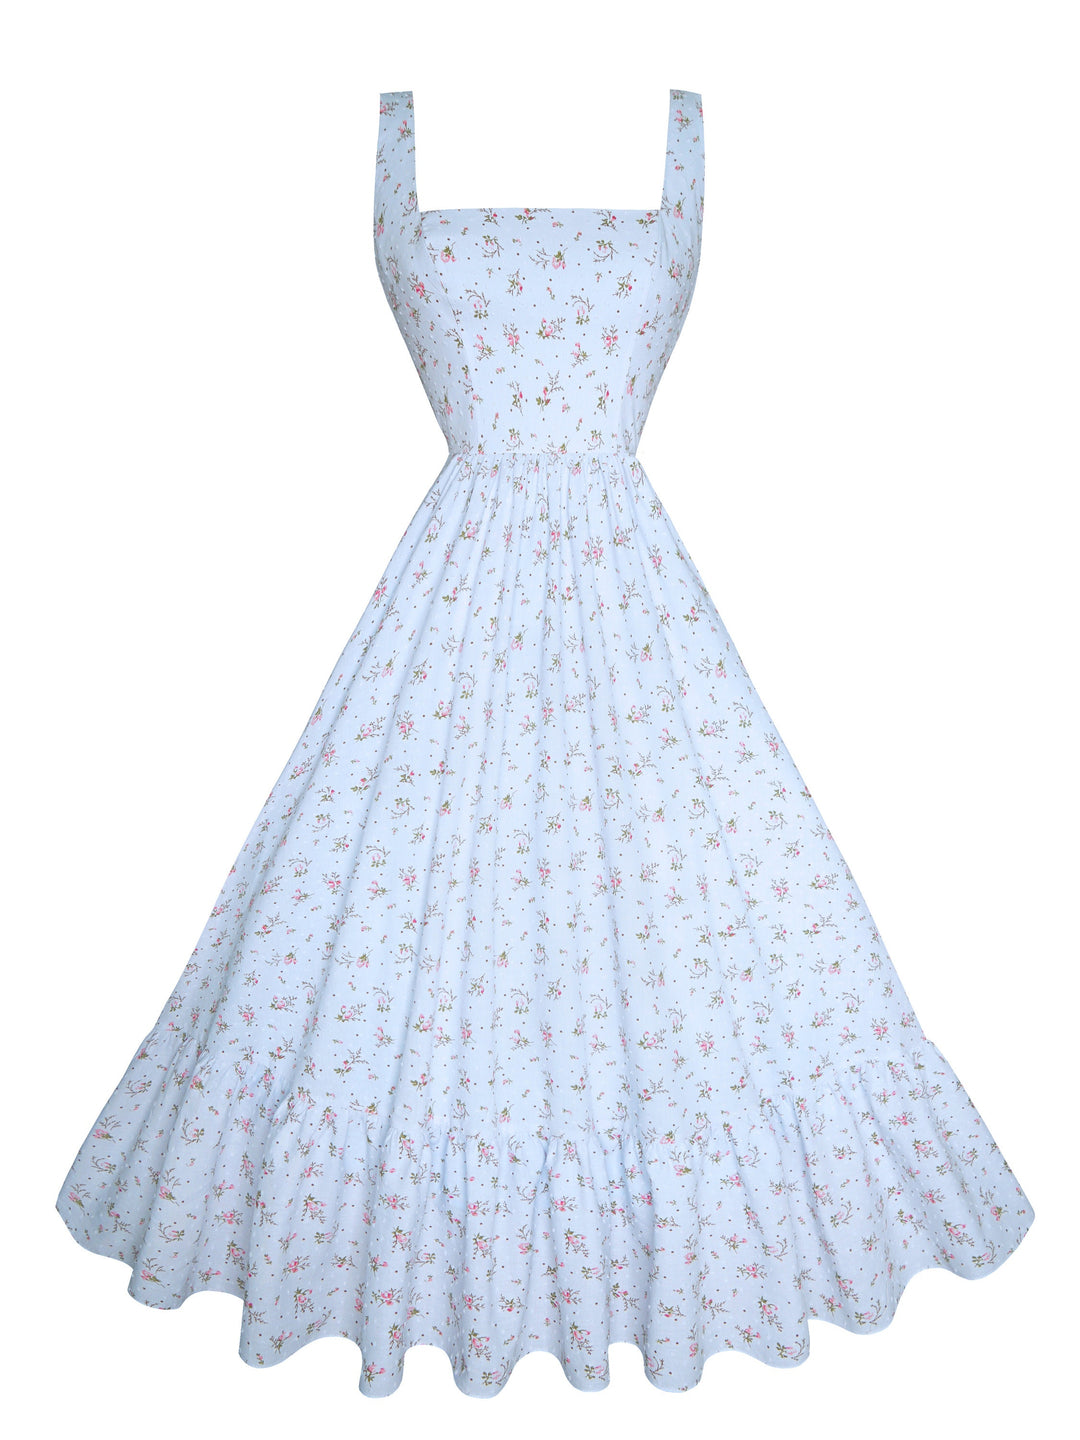 MTO - Henrietta Dress in Blue "Ditzy Floral" Dotted Swiss